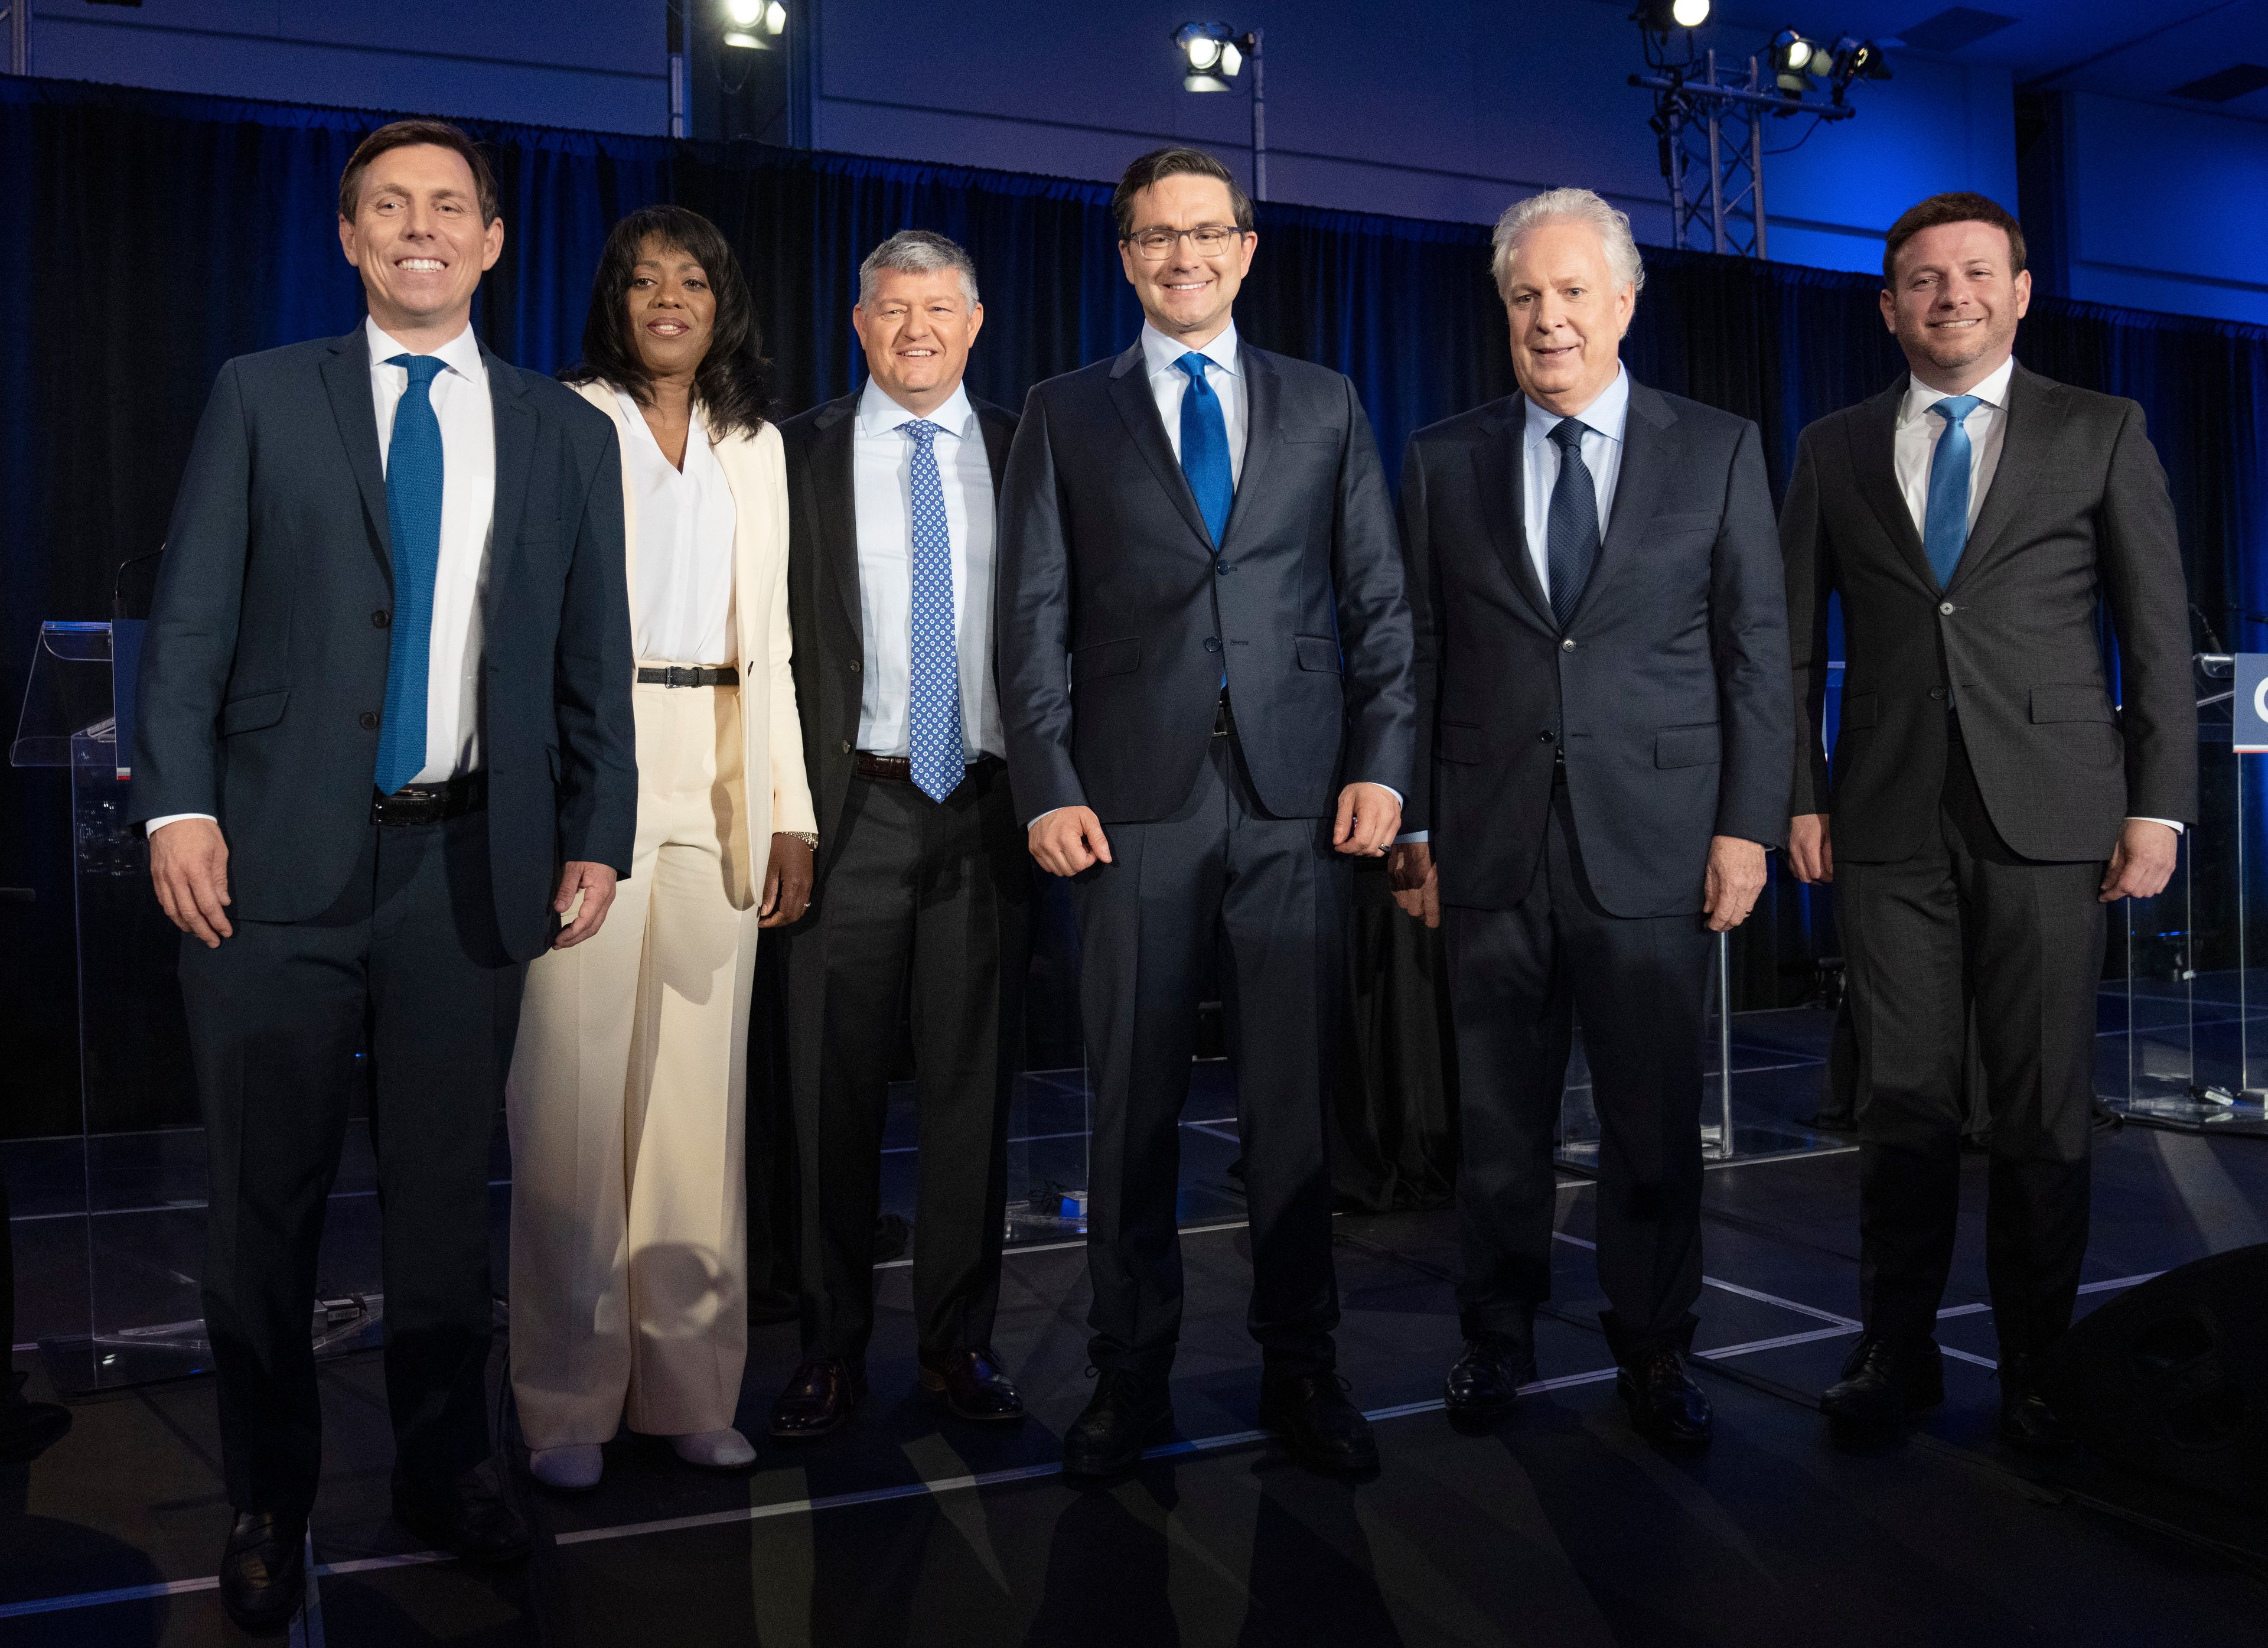 Candidates Patrick Brown, left, Leslyn Lewis, Scott Aitchison, Pierre Poilievre, Jean Charest and Roman Baber, pose for photos after the French-language Conservative Leadership debate Wednesday, May 25, 2022 in Laval, Que.. THE CANADIAN PRESS/Ryan Remiorz